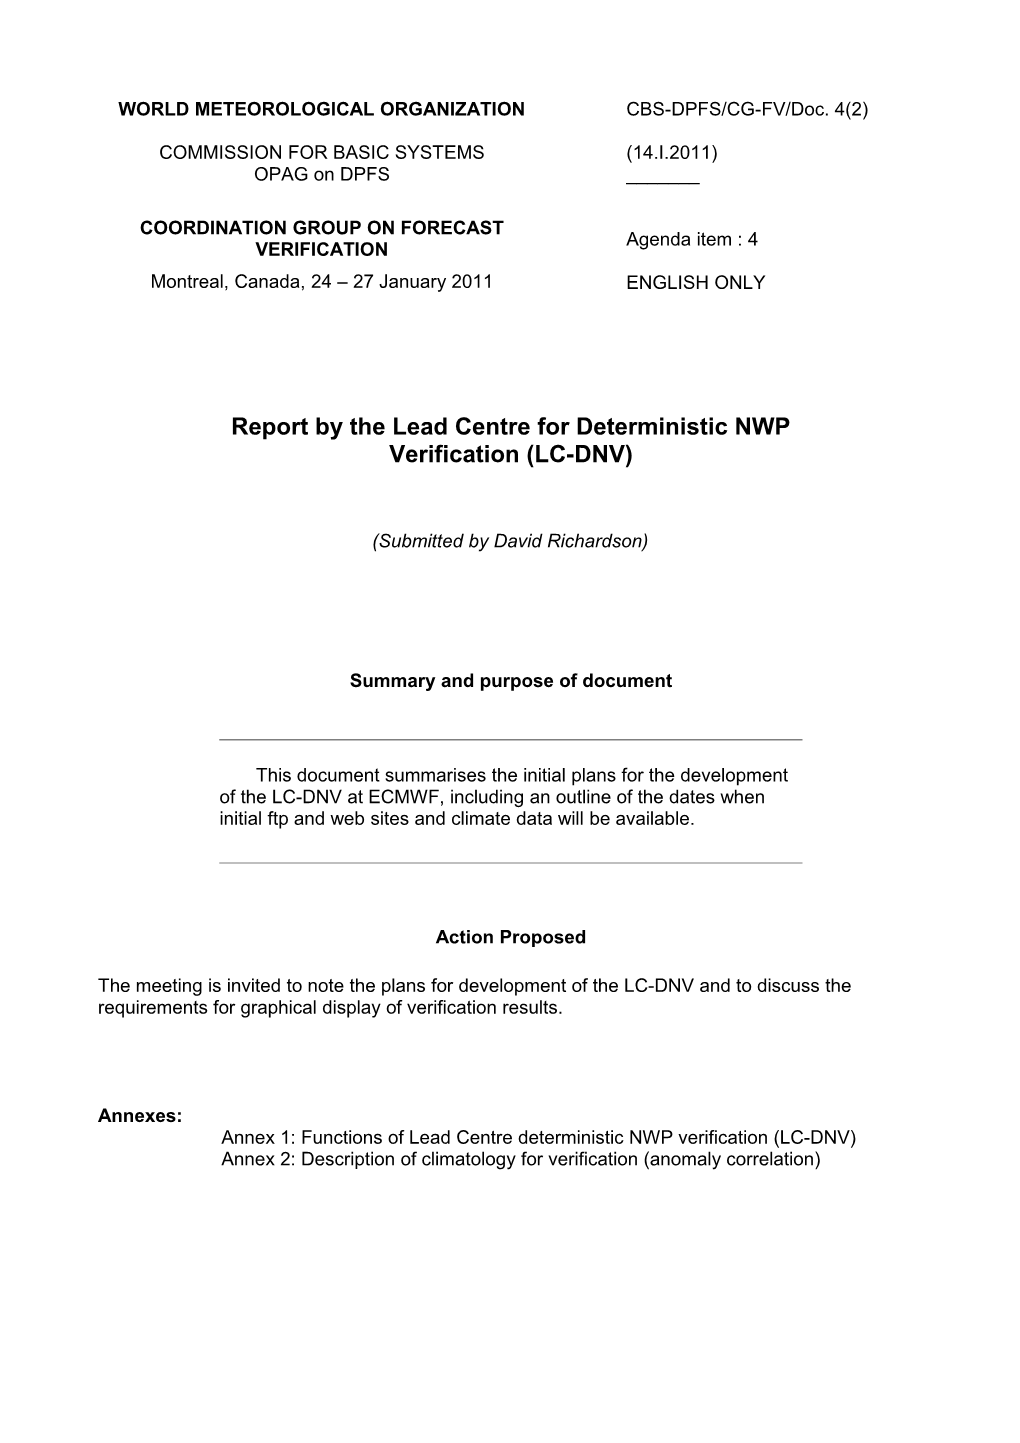 Report by the Lead Centre for Deterministic NWP Verification (LC-DNV)